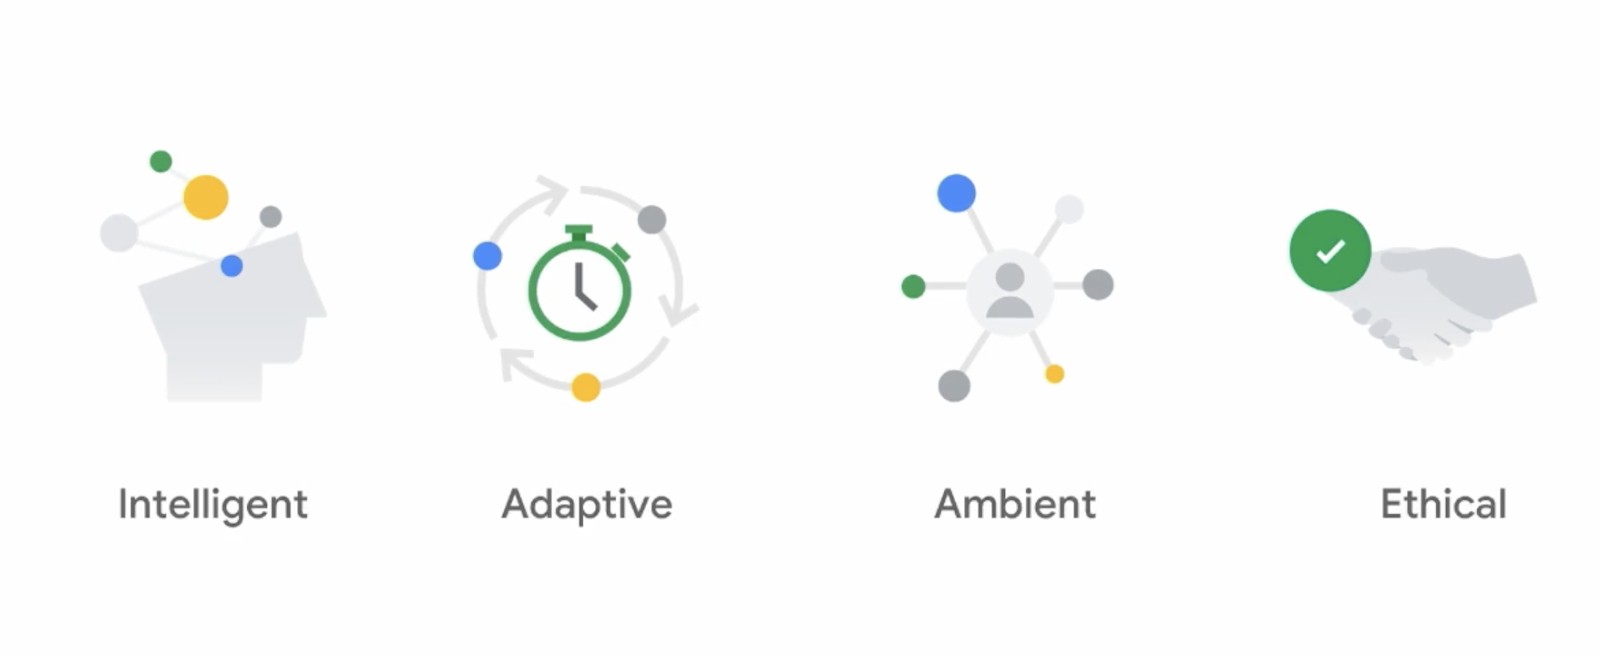 Four icons - one with a head labelled intelligent, one with a clock labelled adaptive, one with a person branching off labelled ambient, and the last is hands shaking labelled ethical. 